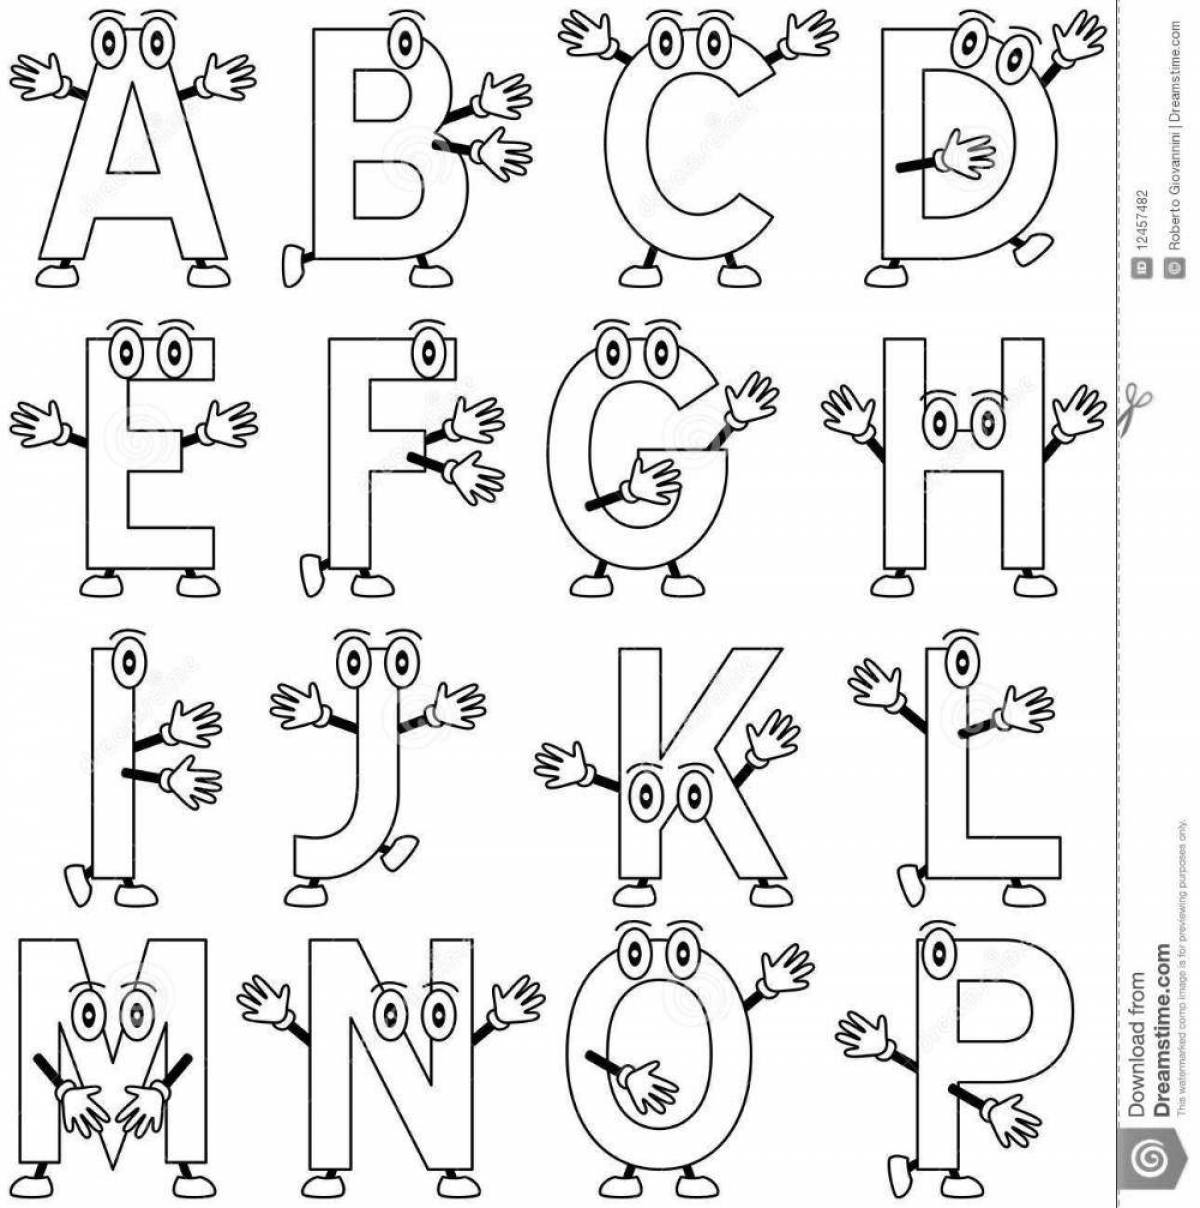 Funny knowledge of the alphabet with eyes